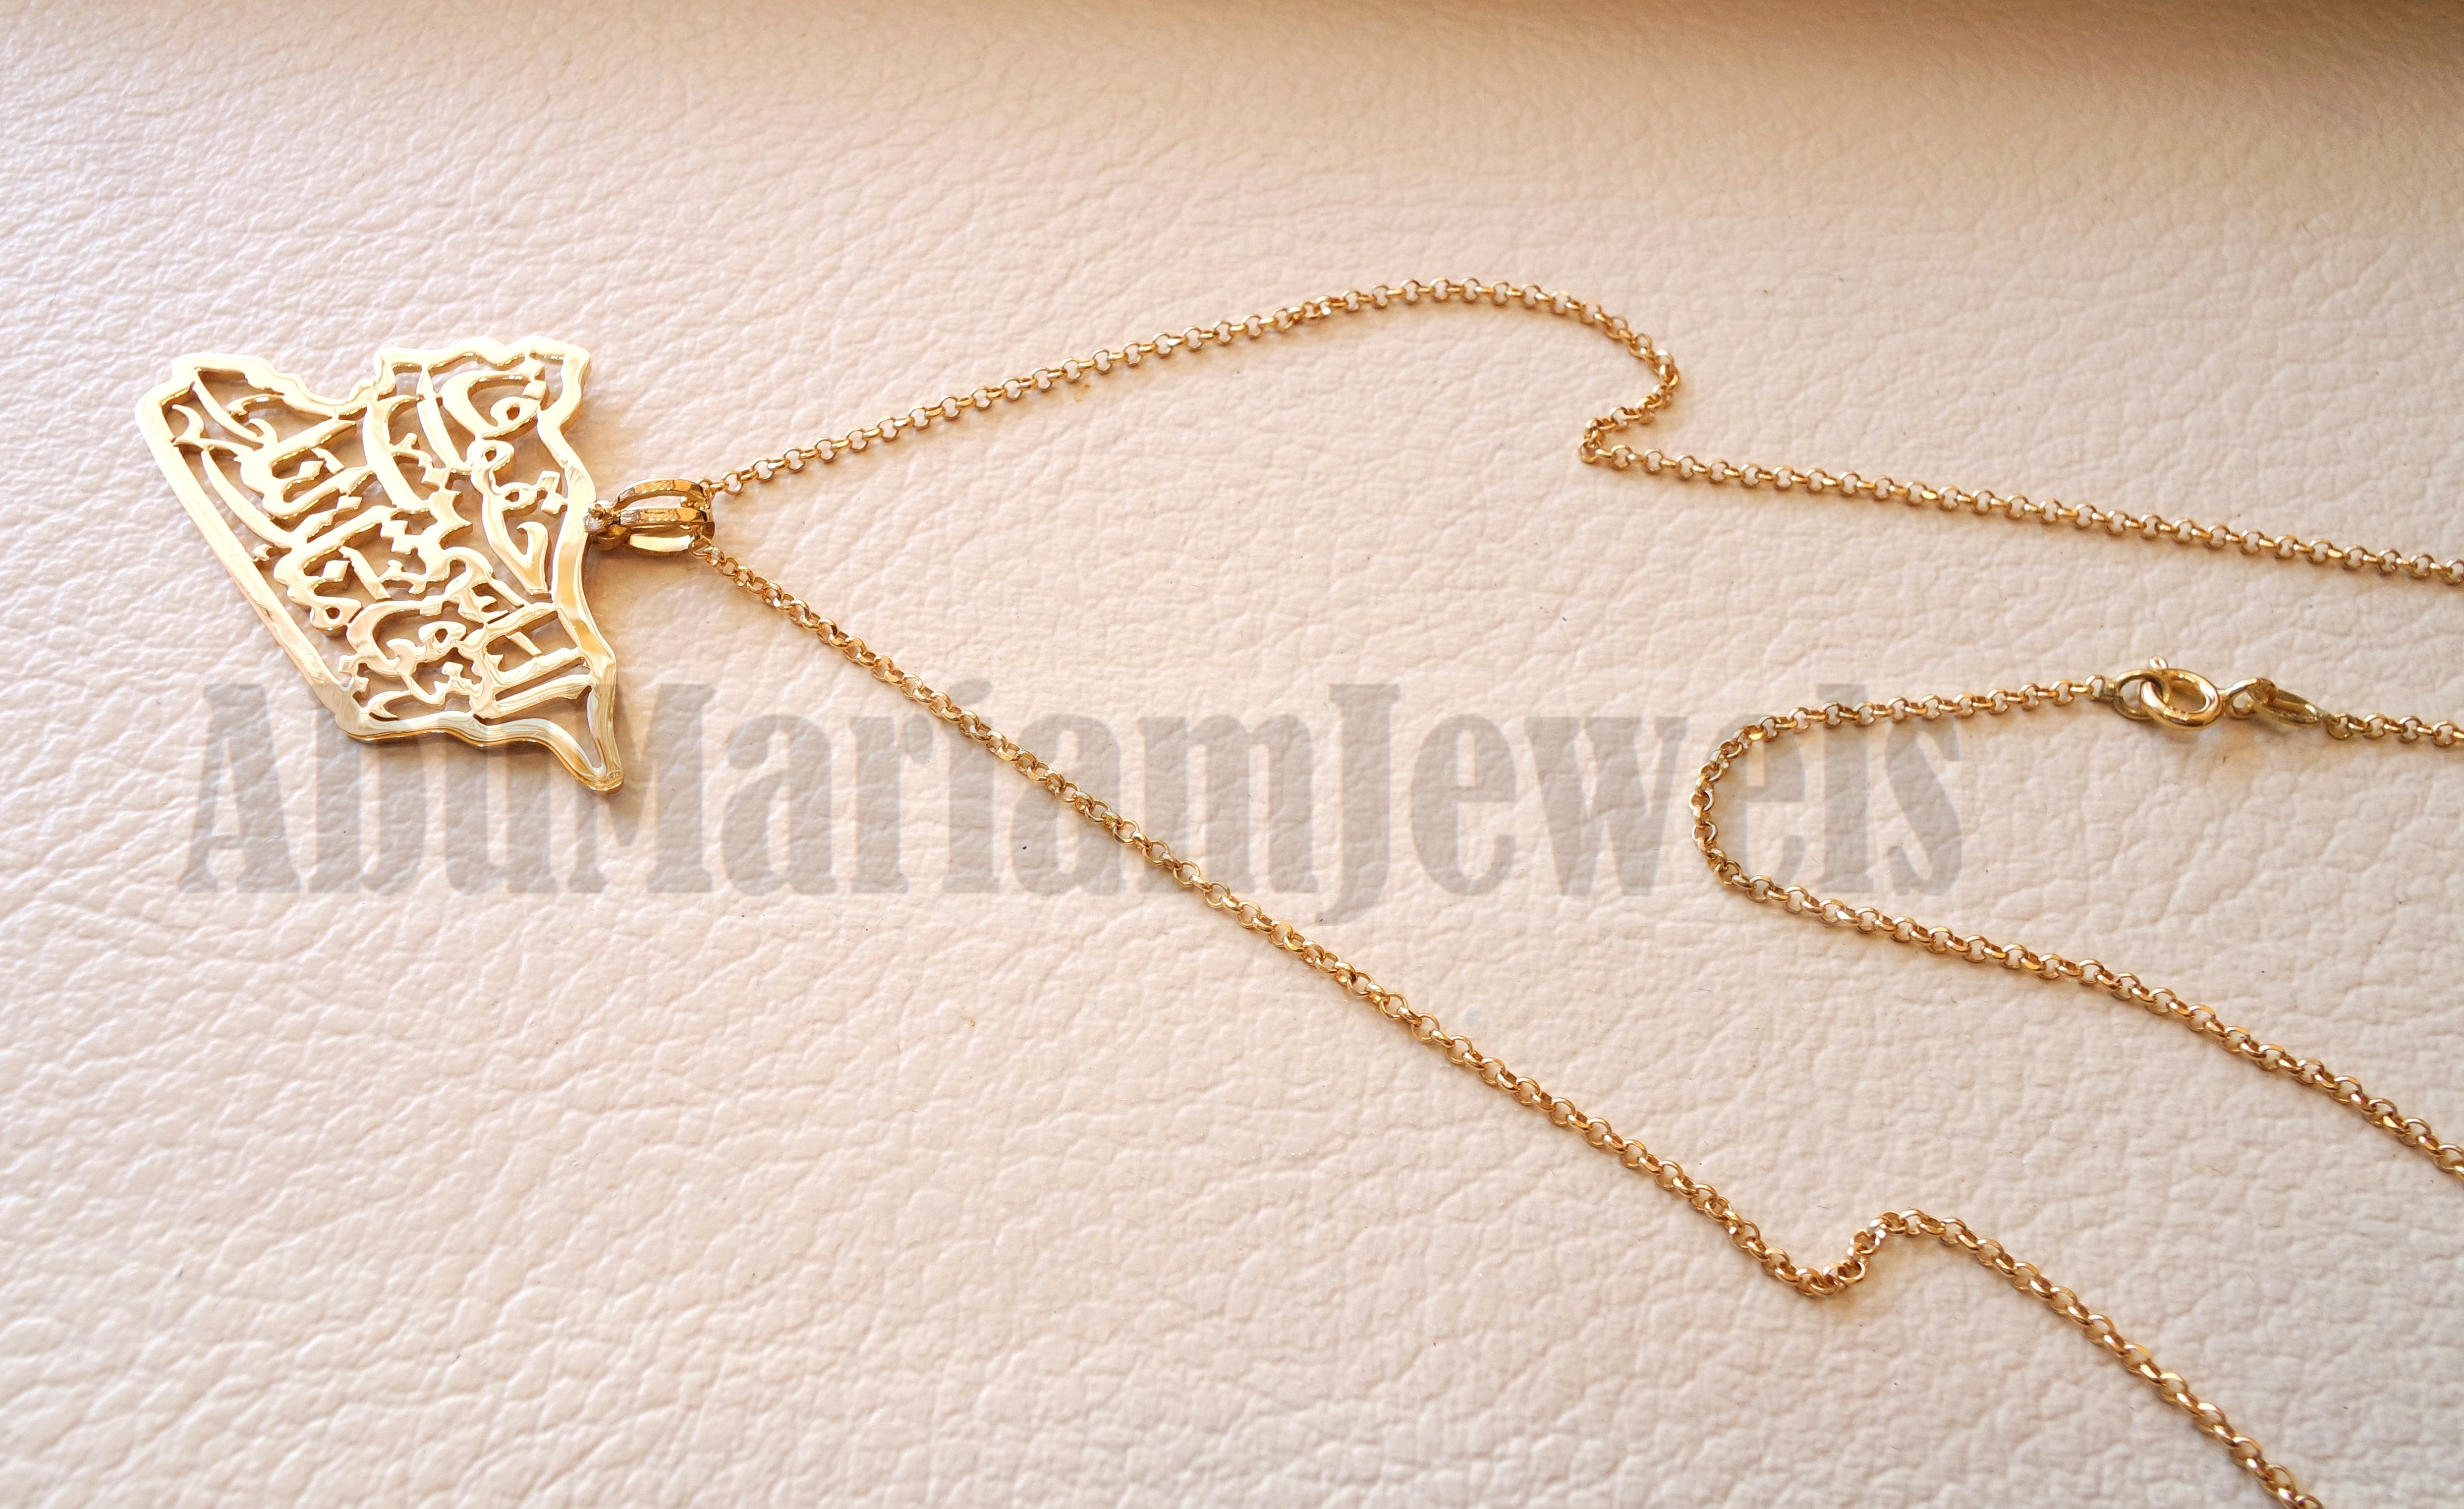 Syria map pendant with chain with famous poem verse sterling 18k gold high quality jewelry arabic fast shipping خارطه سوريا